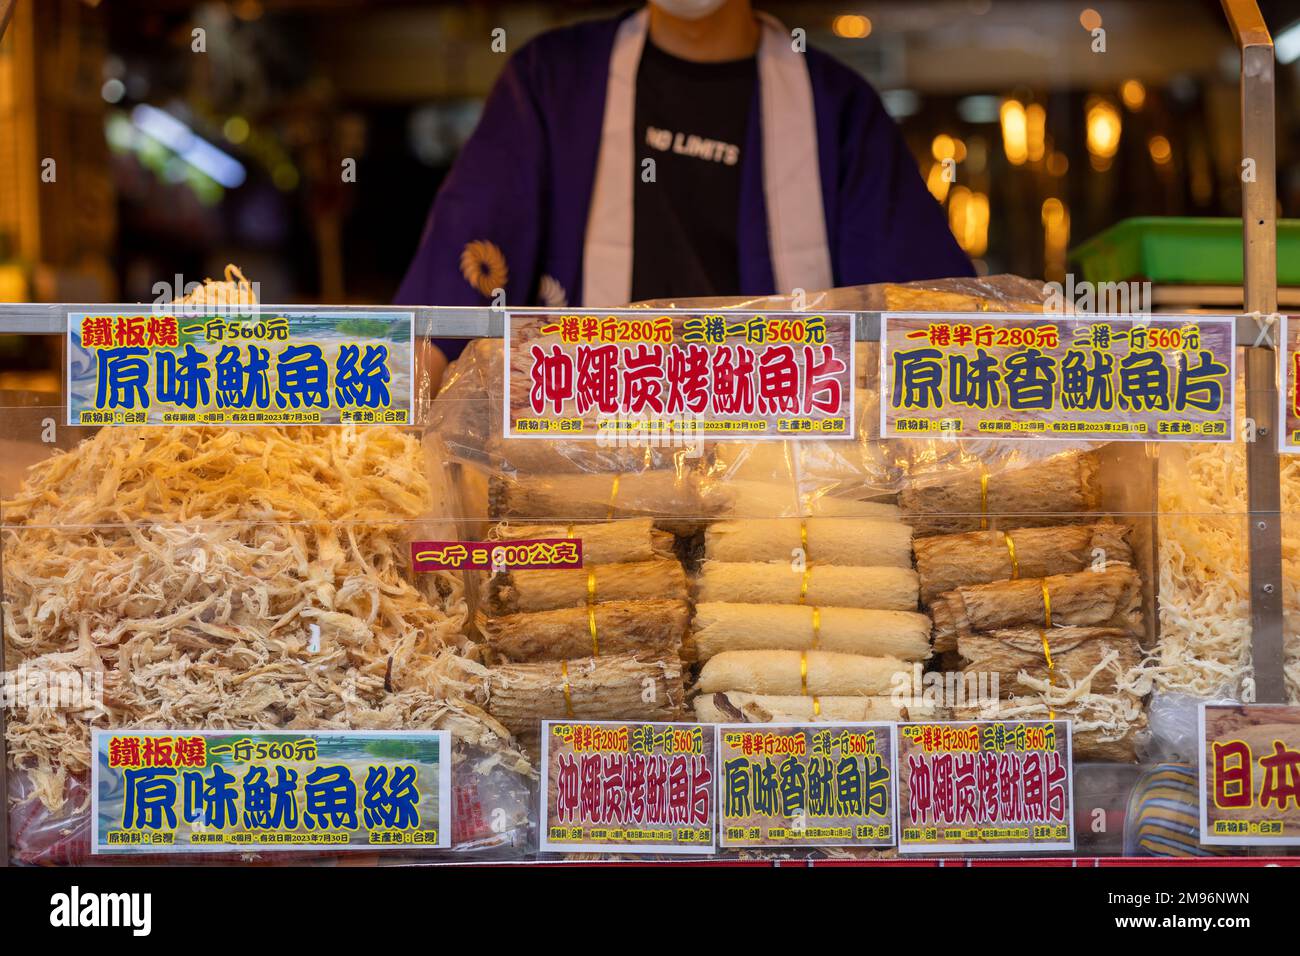 Dried squid prepared in different ways at the Dihua Street New Year's market in Taipei ahead of the Lunar New Year and the Year of the Rabbit. Stock Photo